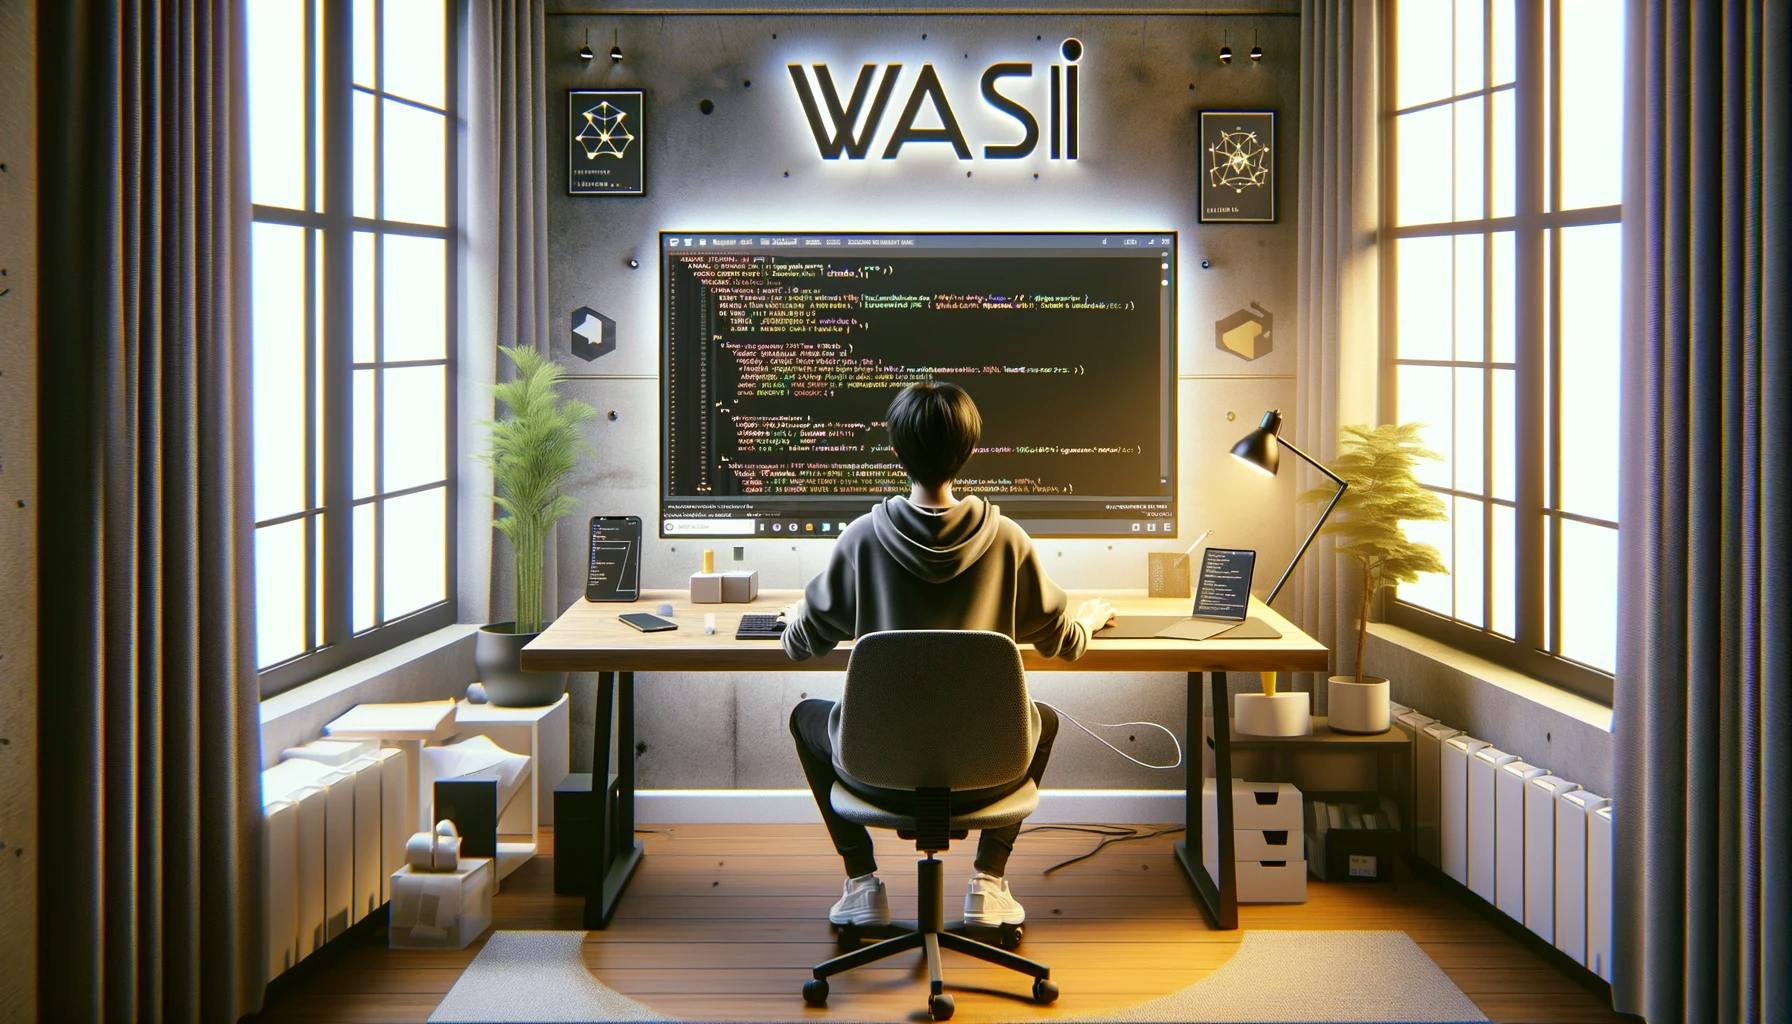 A person in a hoodie sitting at a computer desk using a computer, with a large screen with code on the wall and the wasi illuminated above that